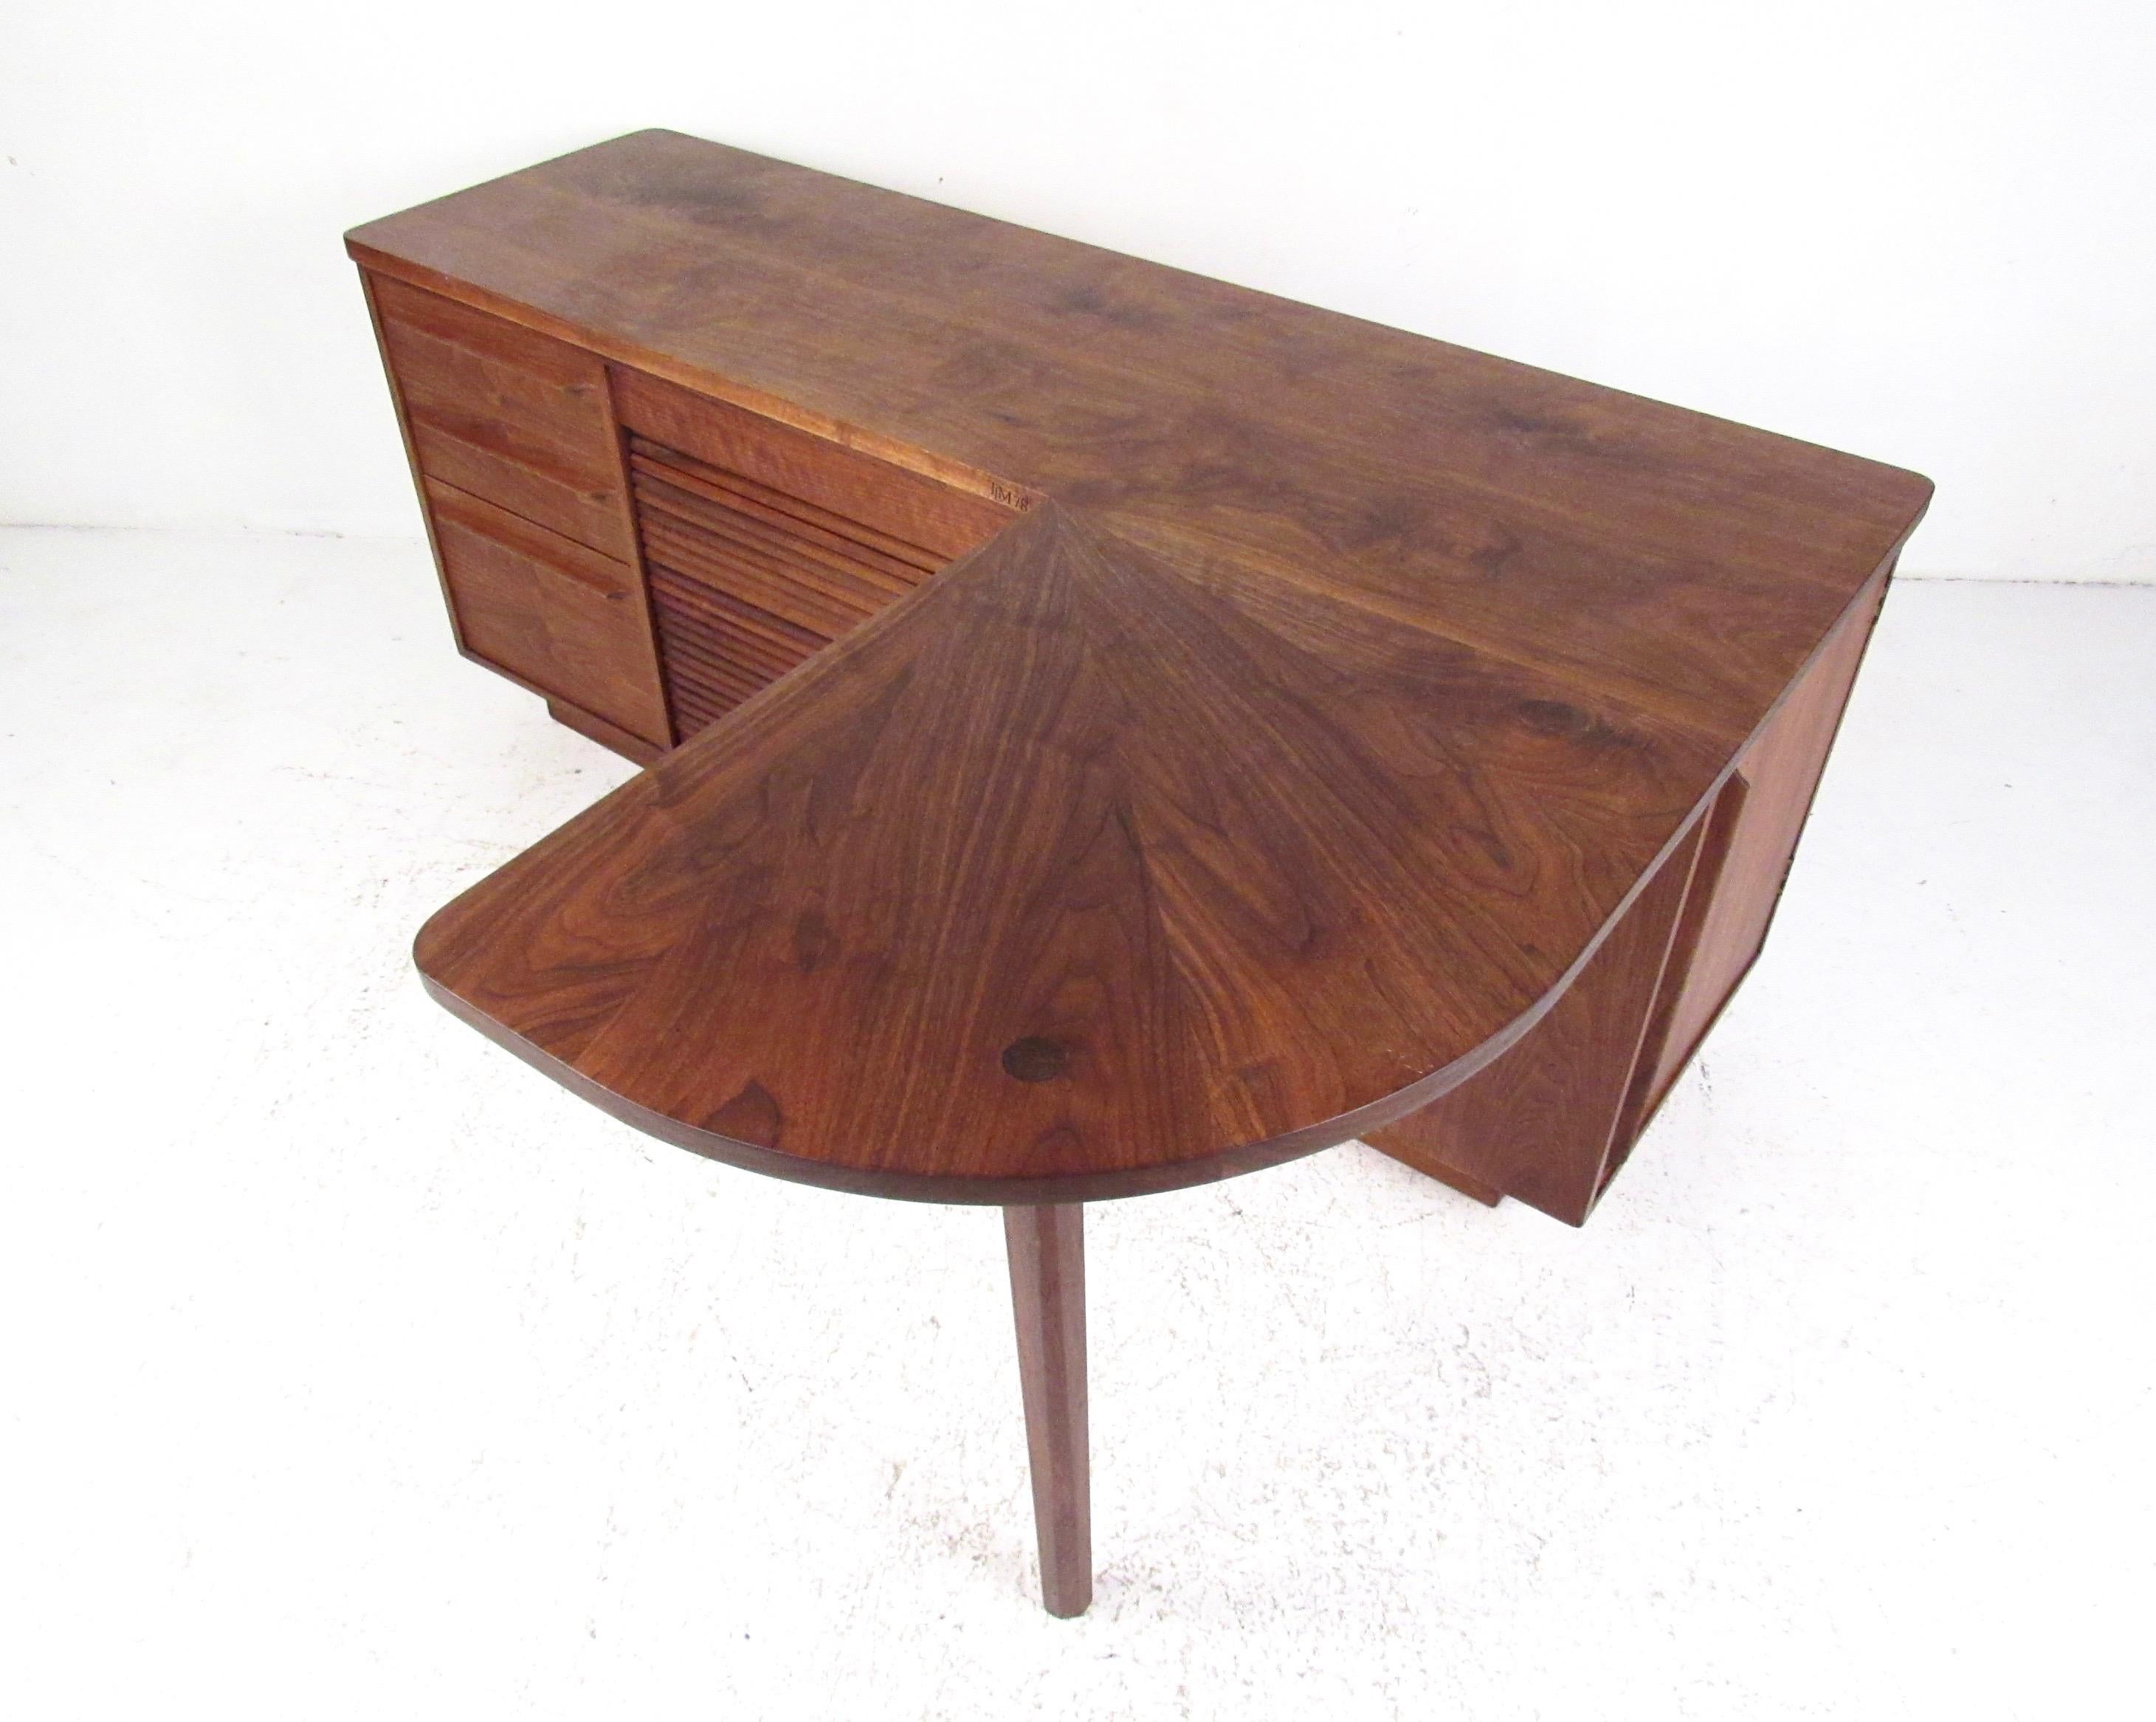 This unique L shaped executive desk features spacious work space, vertical tambour door cabinet, carefully carved handles, and plenty of storage options for home or business office. The quality mid-century modern construction of this American made